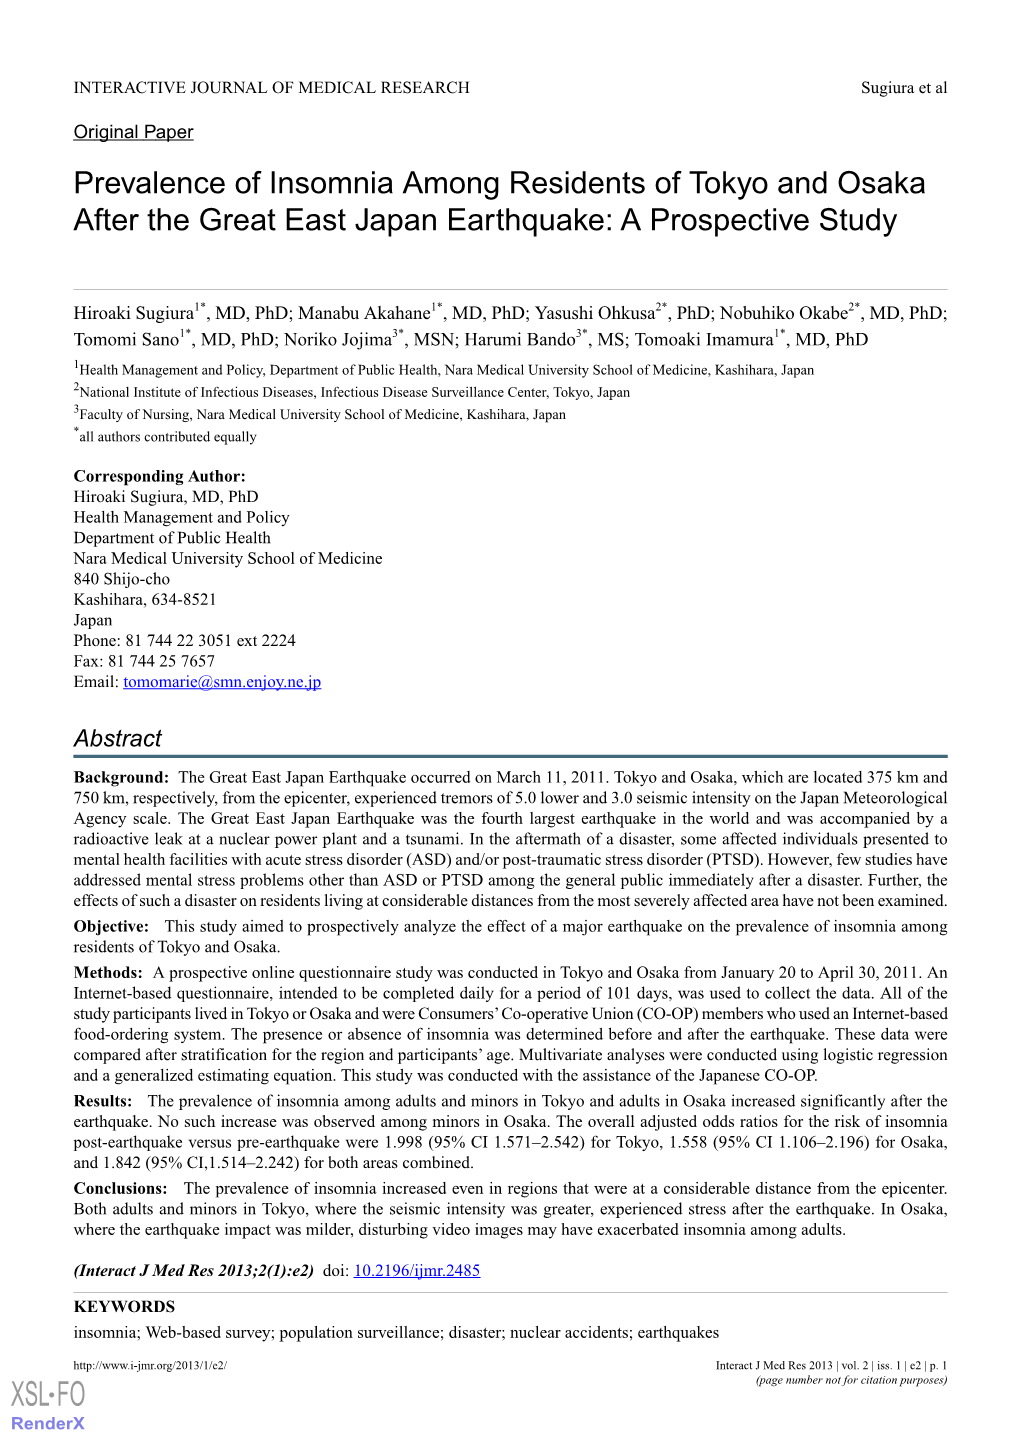 Prevalence of Insomnia Among Residents of Tokyo and Osaka After the Great East Japan Earthquake: a Prospective Study